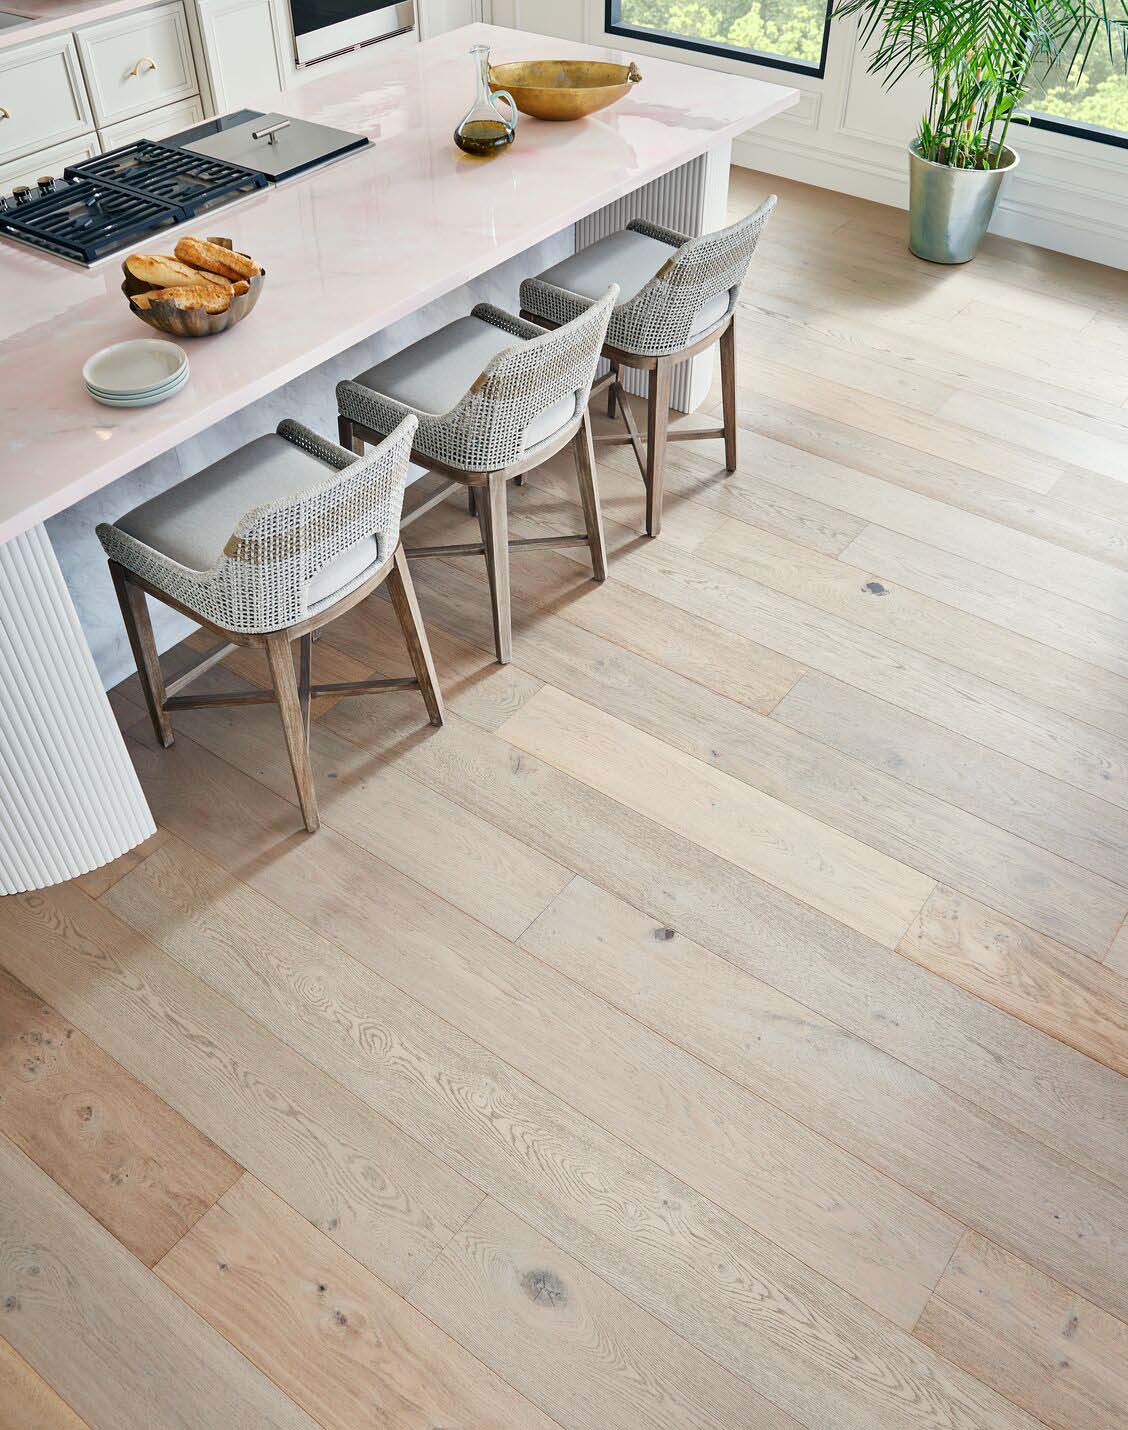 close up of an engineered hardwood floor at a kitchen island